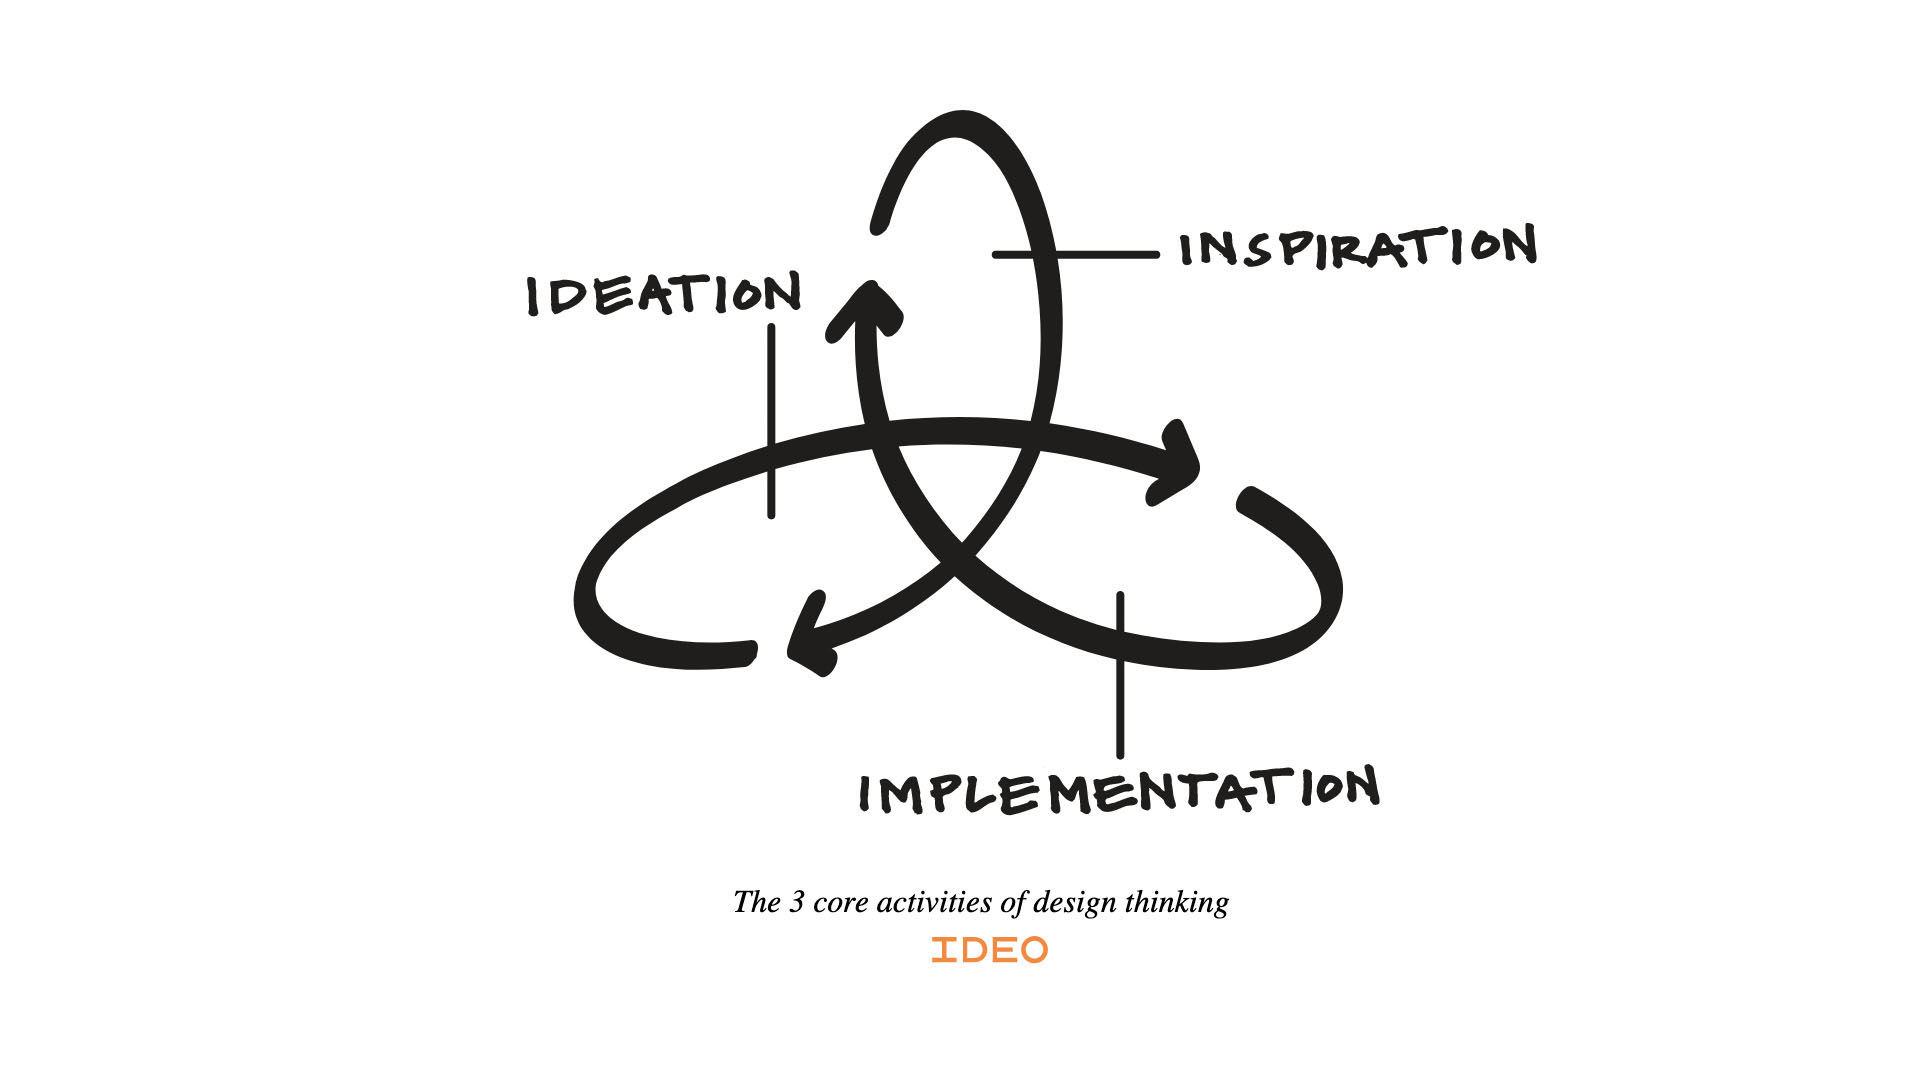 The 3 core activities of deisgn thinking, by IDEO.